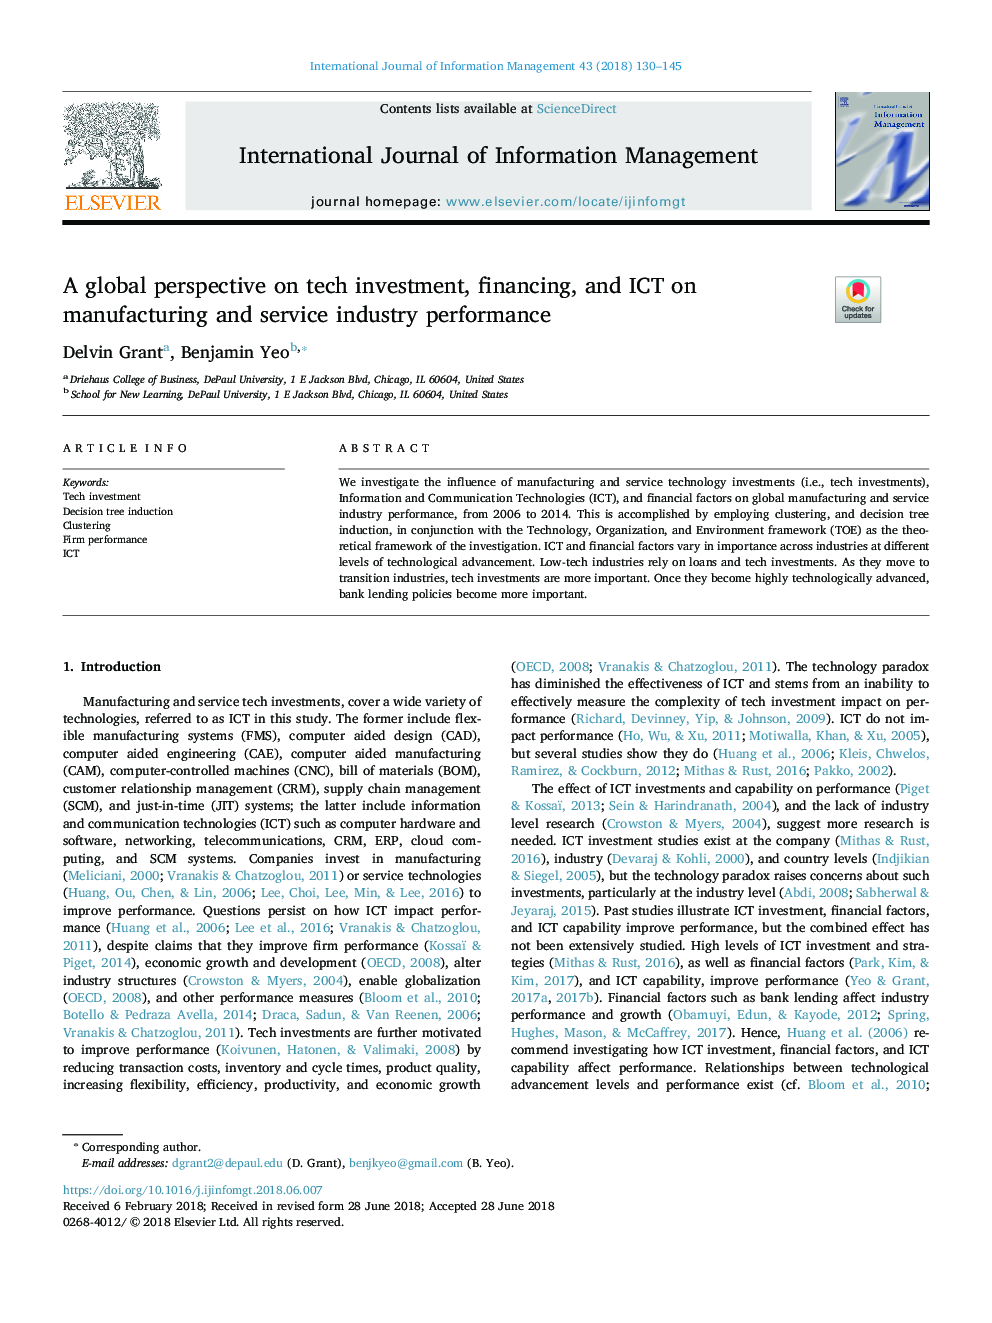 A global perspective on tech investment, financing, and ICT on manufacturing and service industry performance